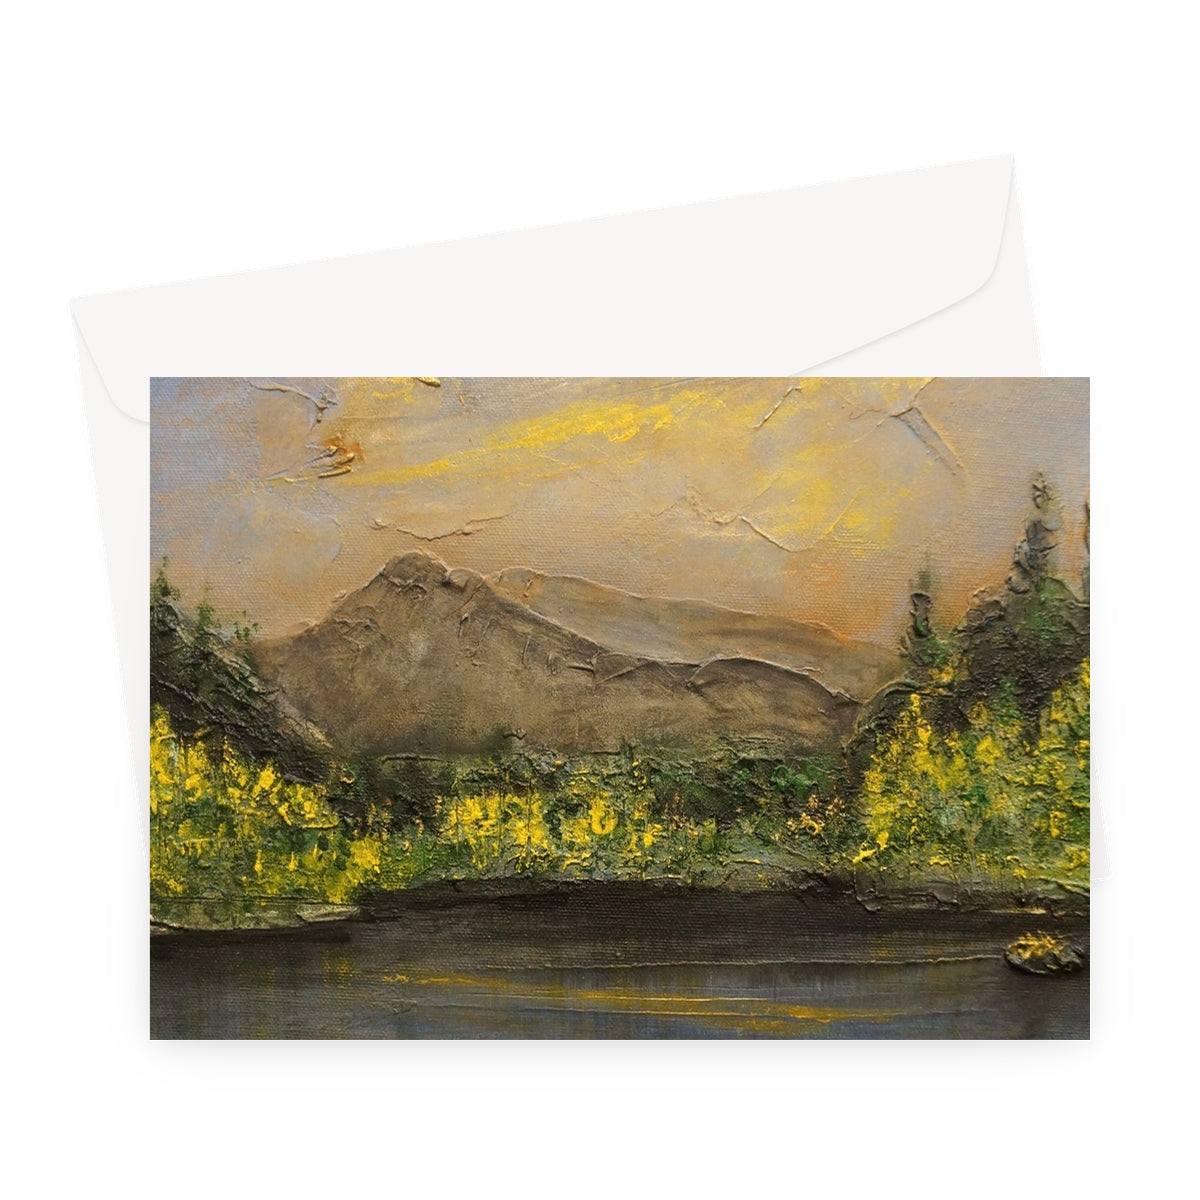 Glencoe Lochan Dusk Art Gifts Greeting Card-Greetings Cards-Scottish Lochs & Mountains Art Gallery-A5 Landscape-1 Card-Paintings, Prints, Homeware, Art Gifts From Scotland By Scottish Artist Kevin Hunter